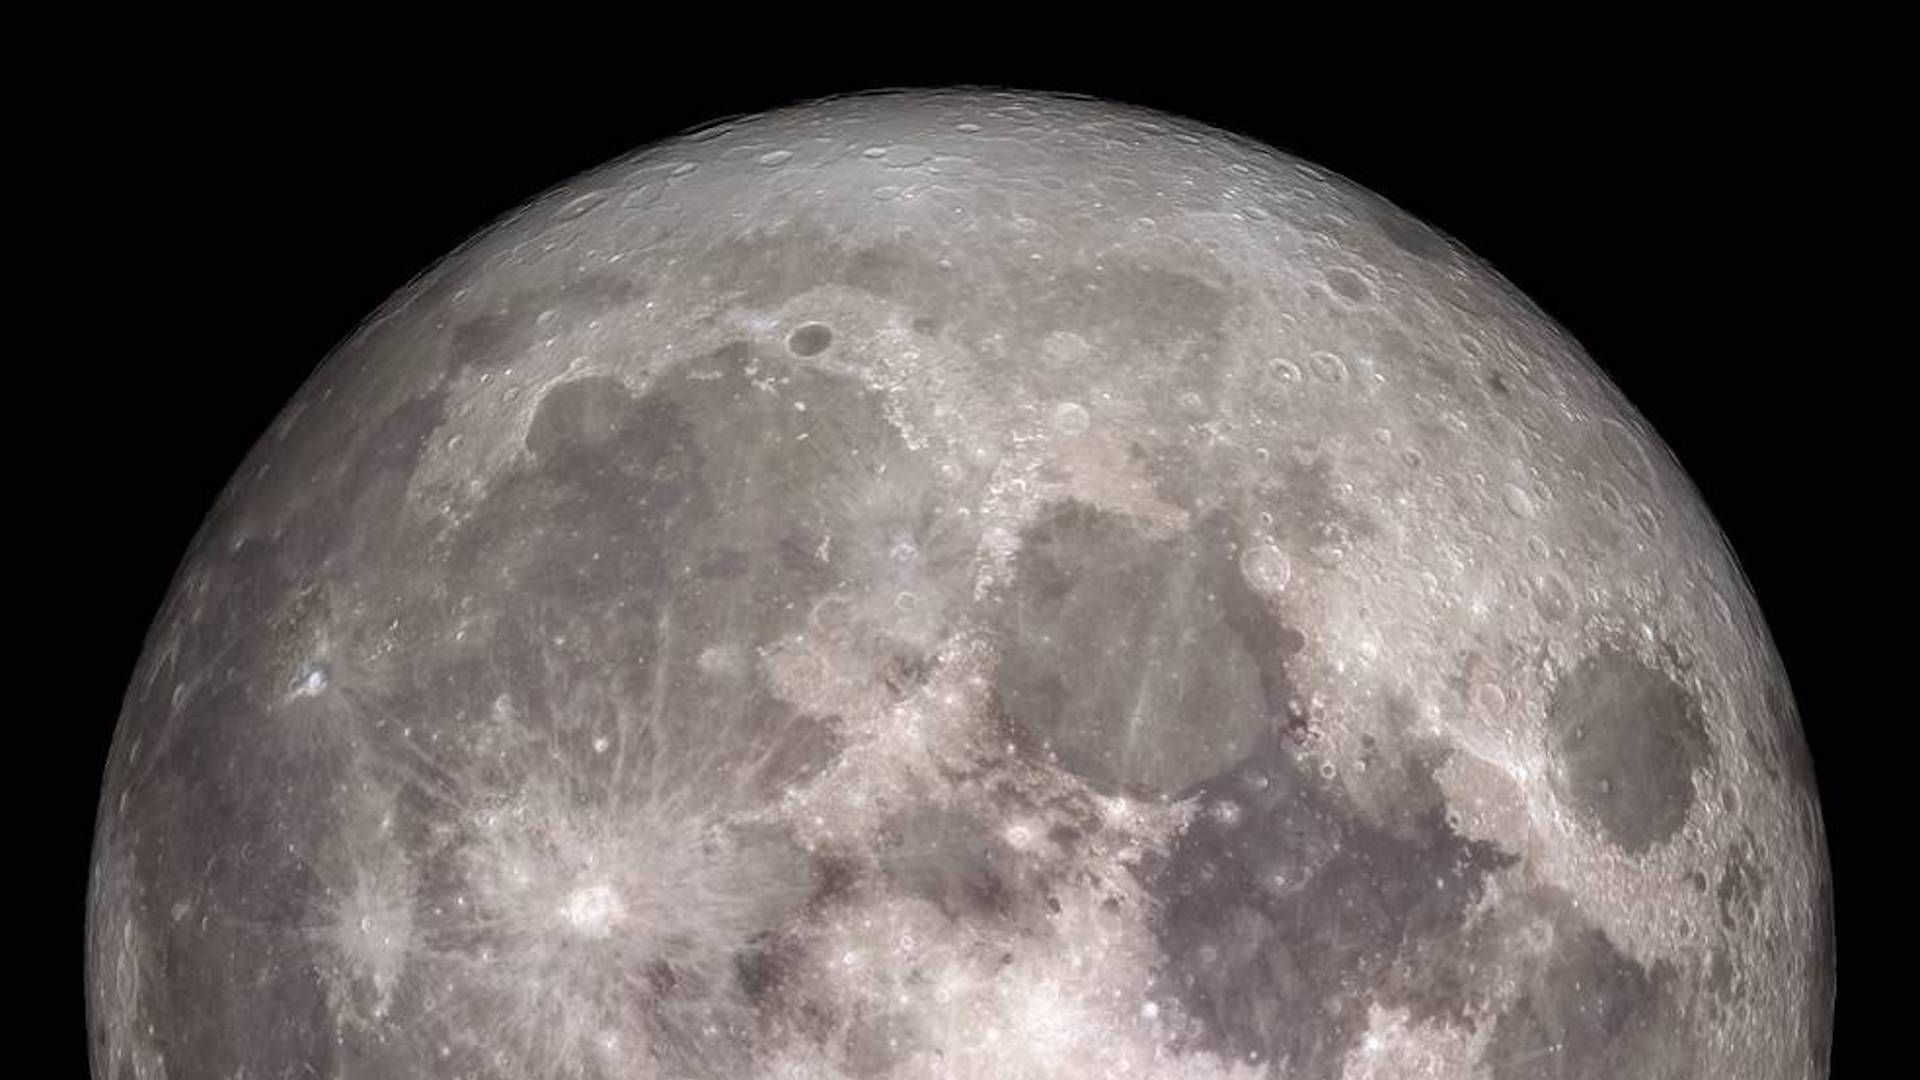 The Moon in full view